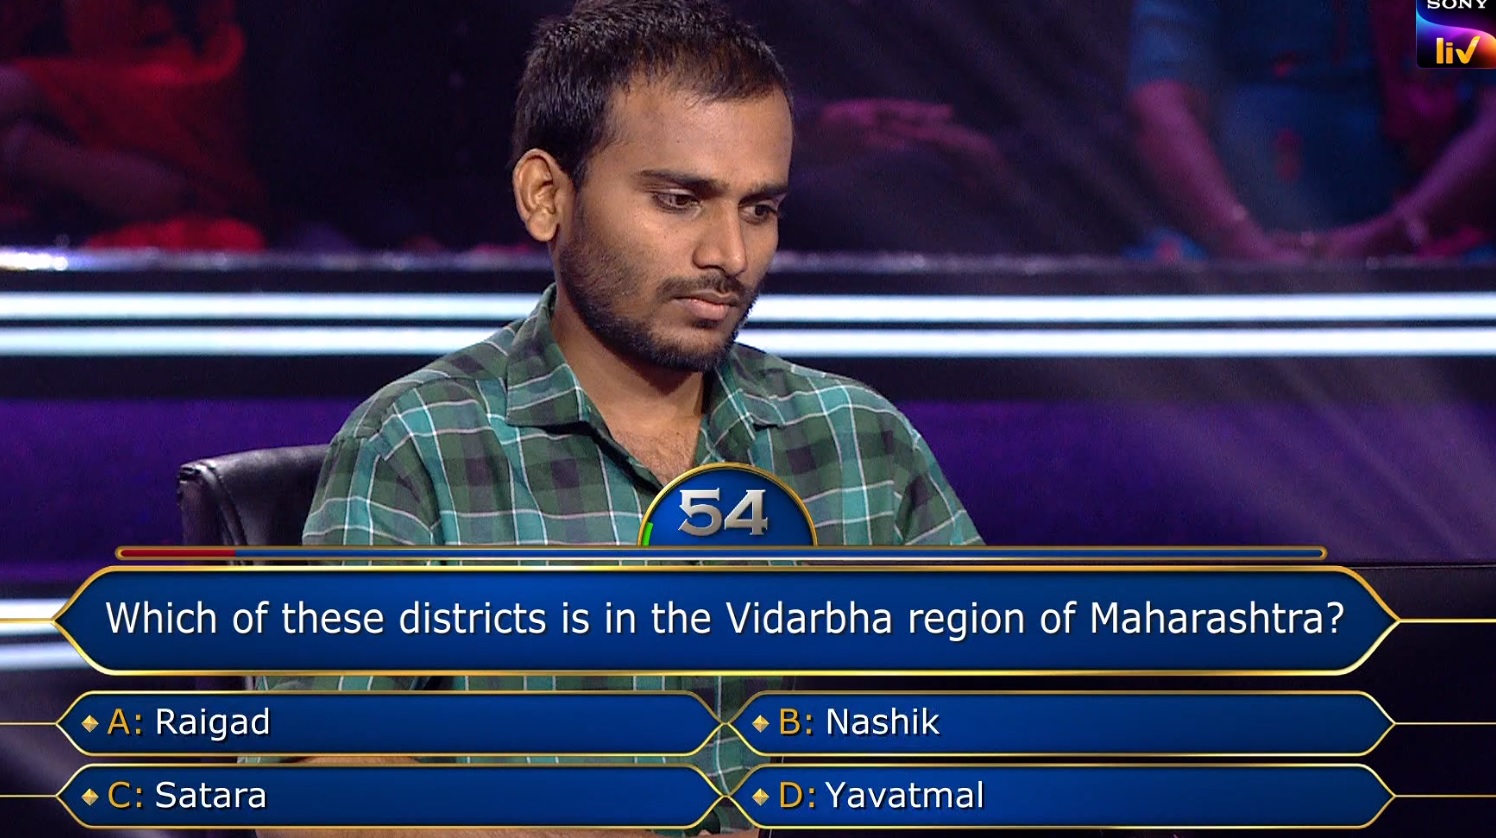 Ques : Which of these districts is in the Vidarbha region of Maharashtra?